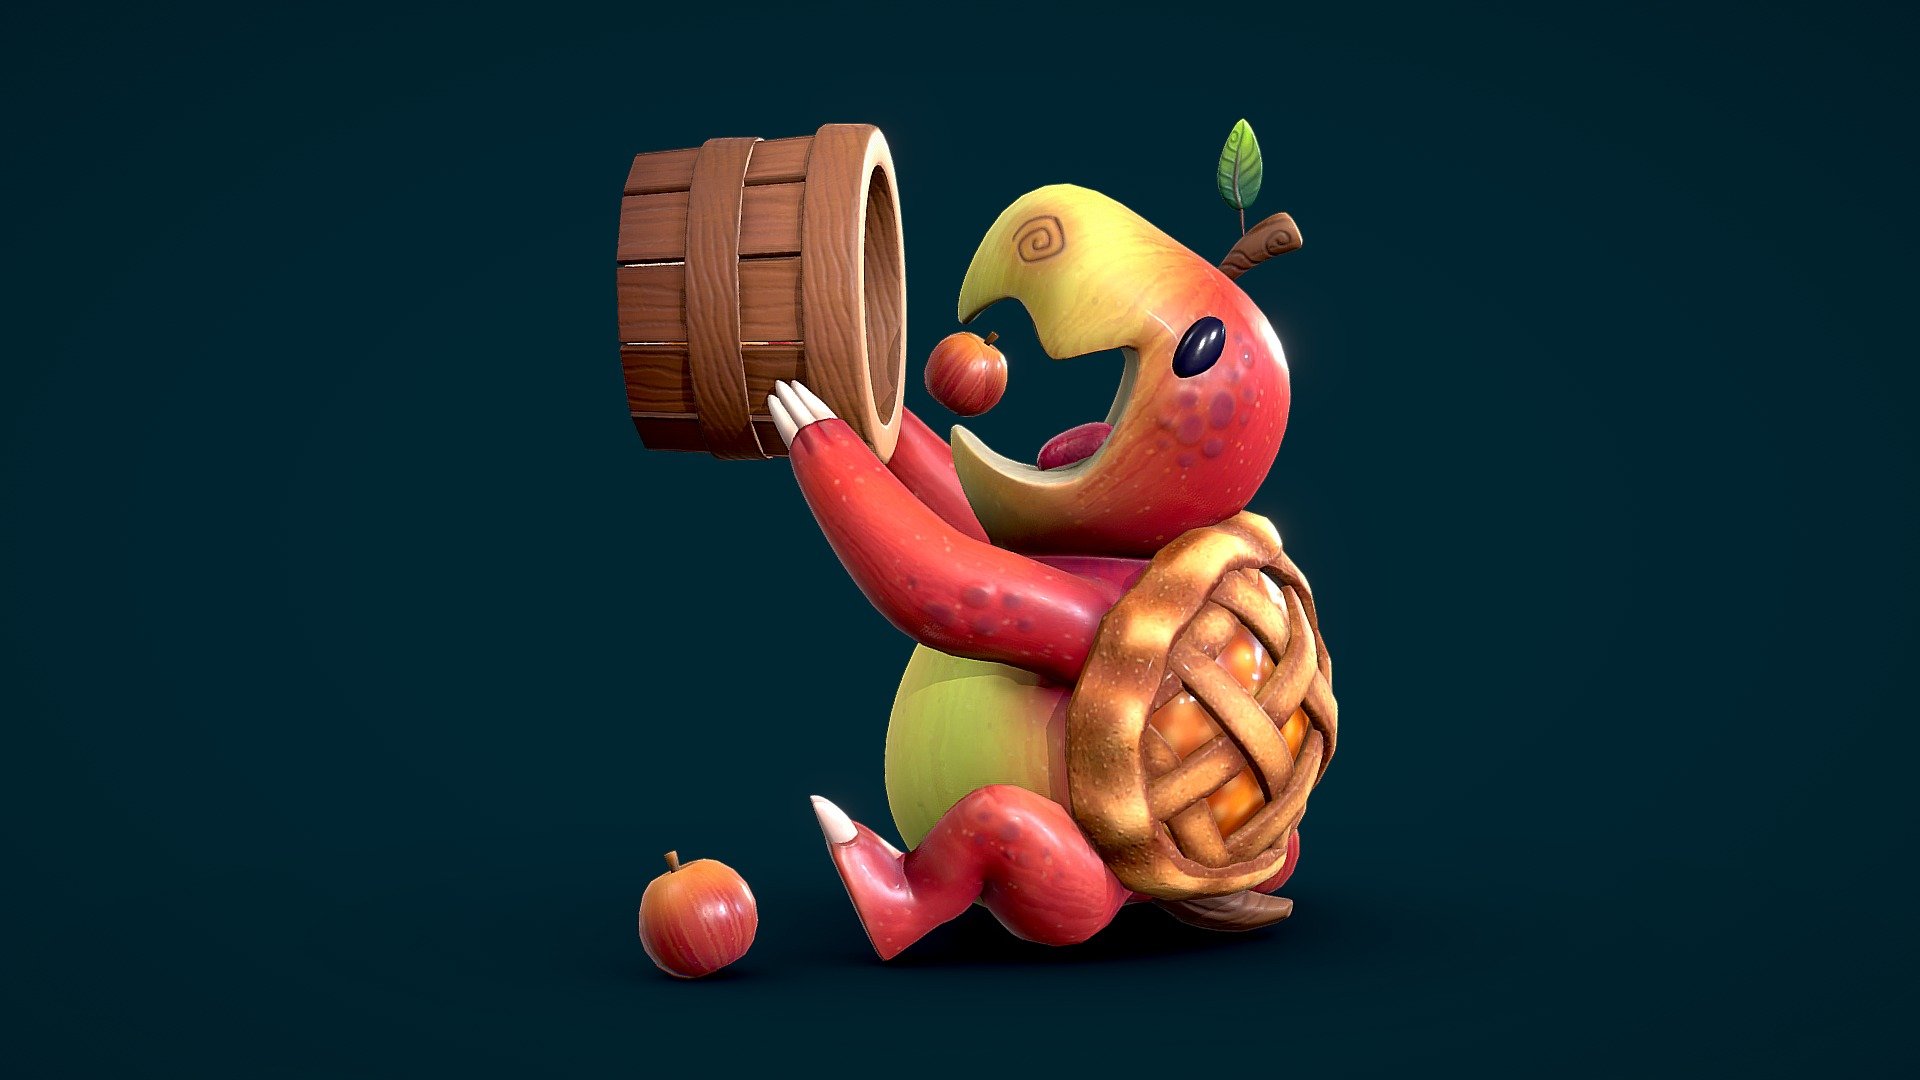 (My reworked and improved) - Cute Creature Assignment for Stylized Character Creation!

Check out my ArtStation Post for more [HD] renders

Concept by: Piper Thibodeau https://www.artstation.com/piperthibodeau
 - Snapple Turtle [HD] - 3D model by meesvanhout (@meesjevanhout) 3d model